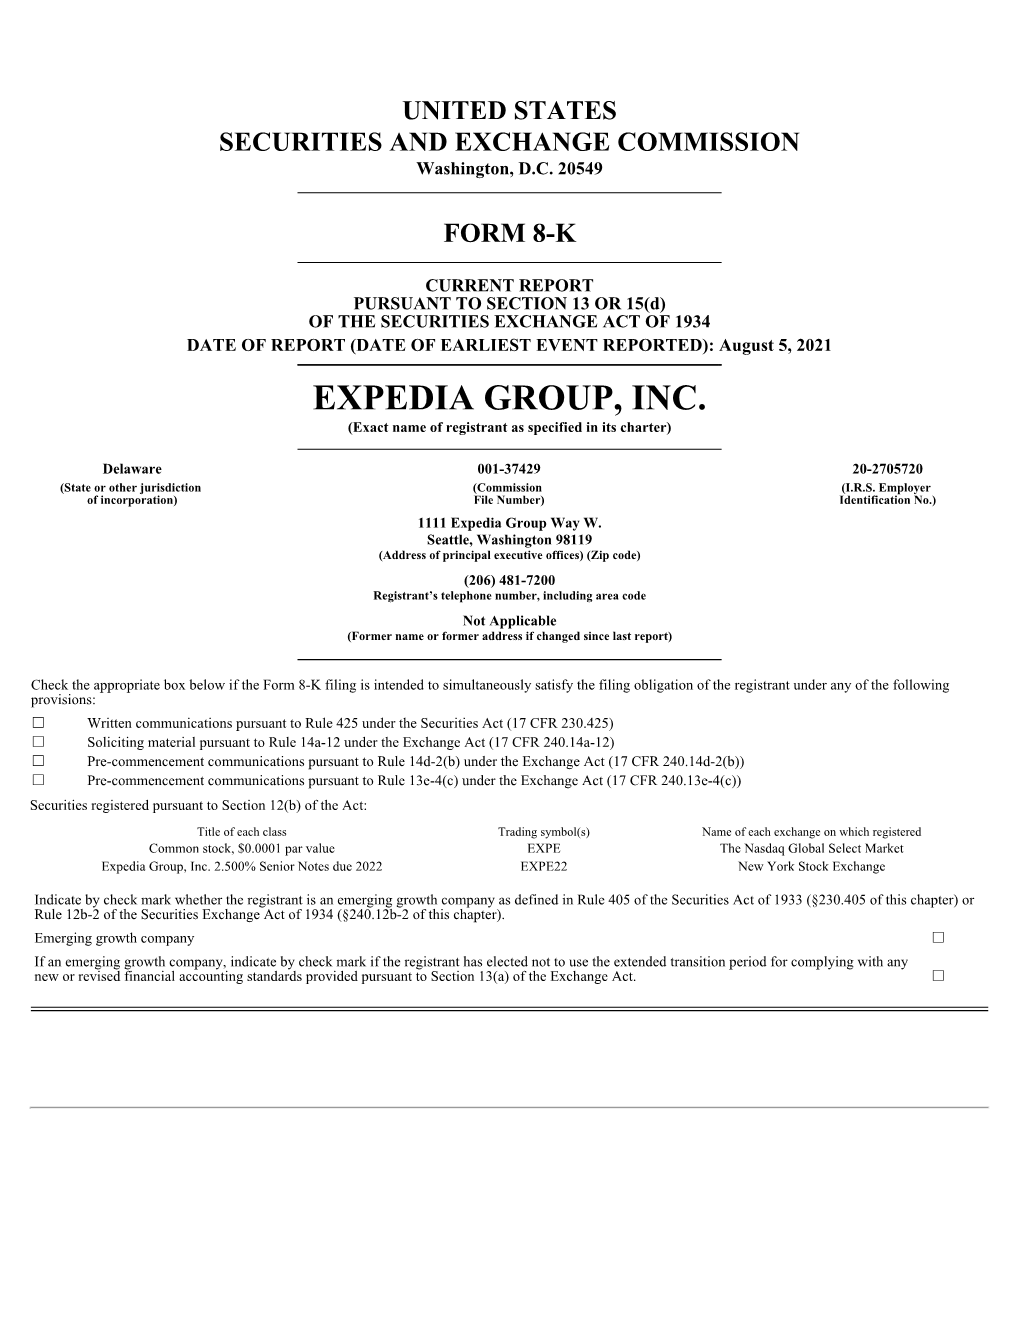 EXPEDIA GROUP, INC. (Exact Name of Registrant As Specified in Its Charter)